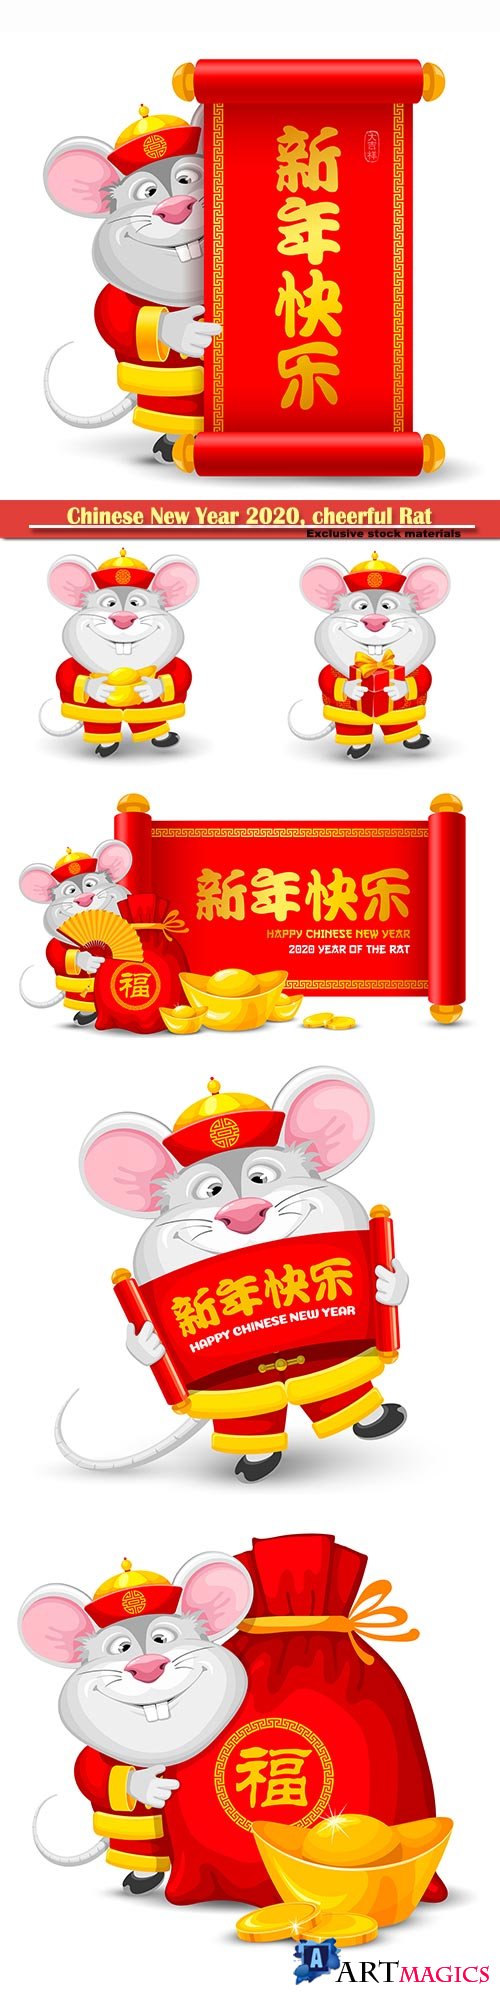 Chinese New Year 2020, cheerful Rat as symbol of new 2020 year